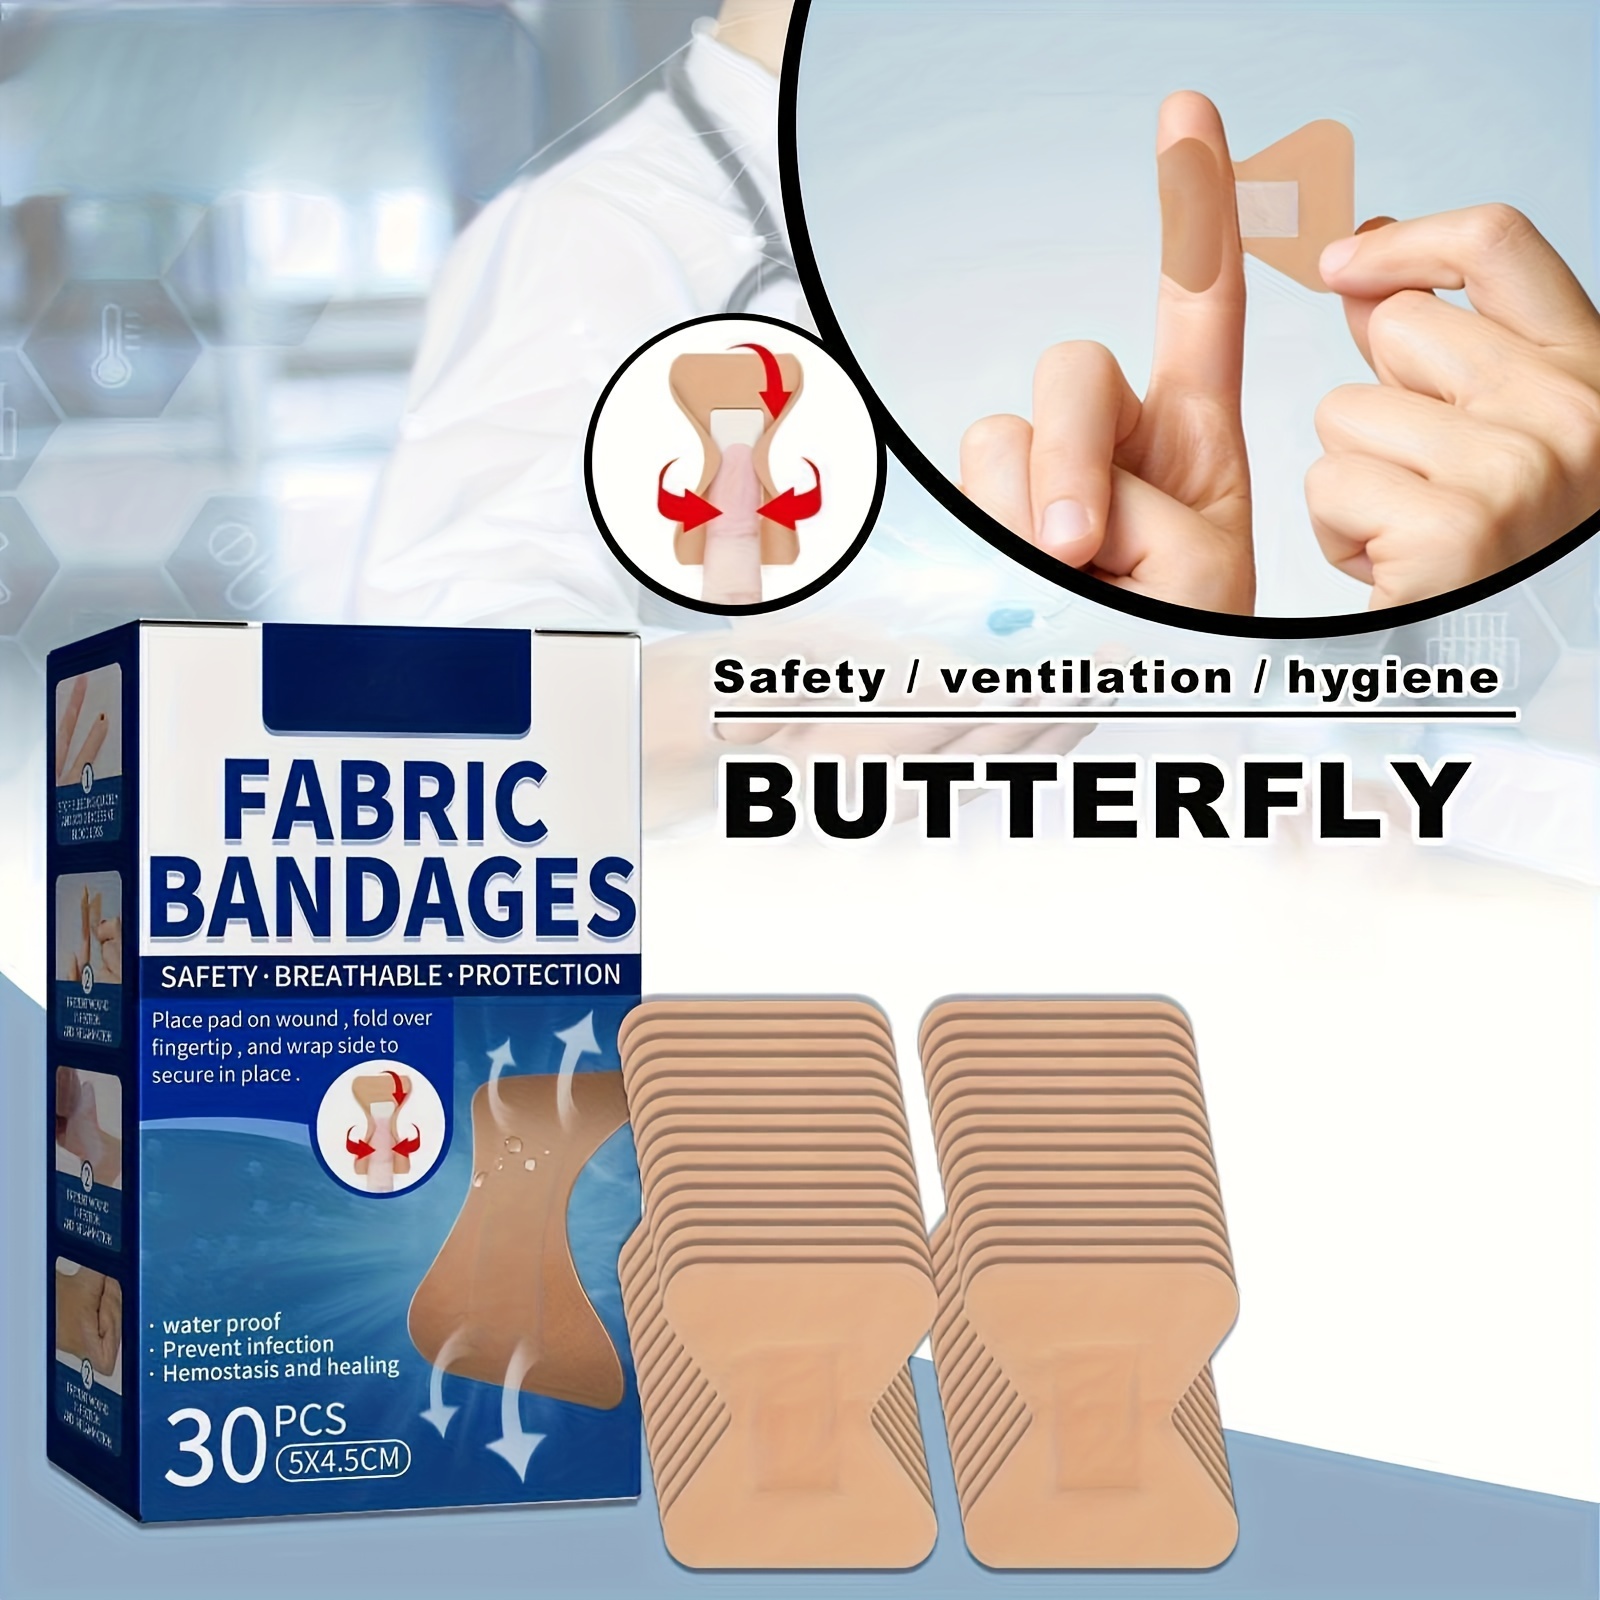 Zip Sutures Adhesive Bandages Emergency Laceration Closures - Laceration  kit for 1/2-3 1/4 inch Wound.Waterproof Flexible Fabric Wound Stitching kit